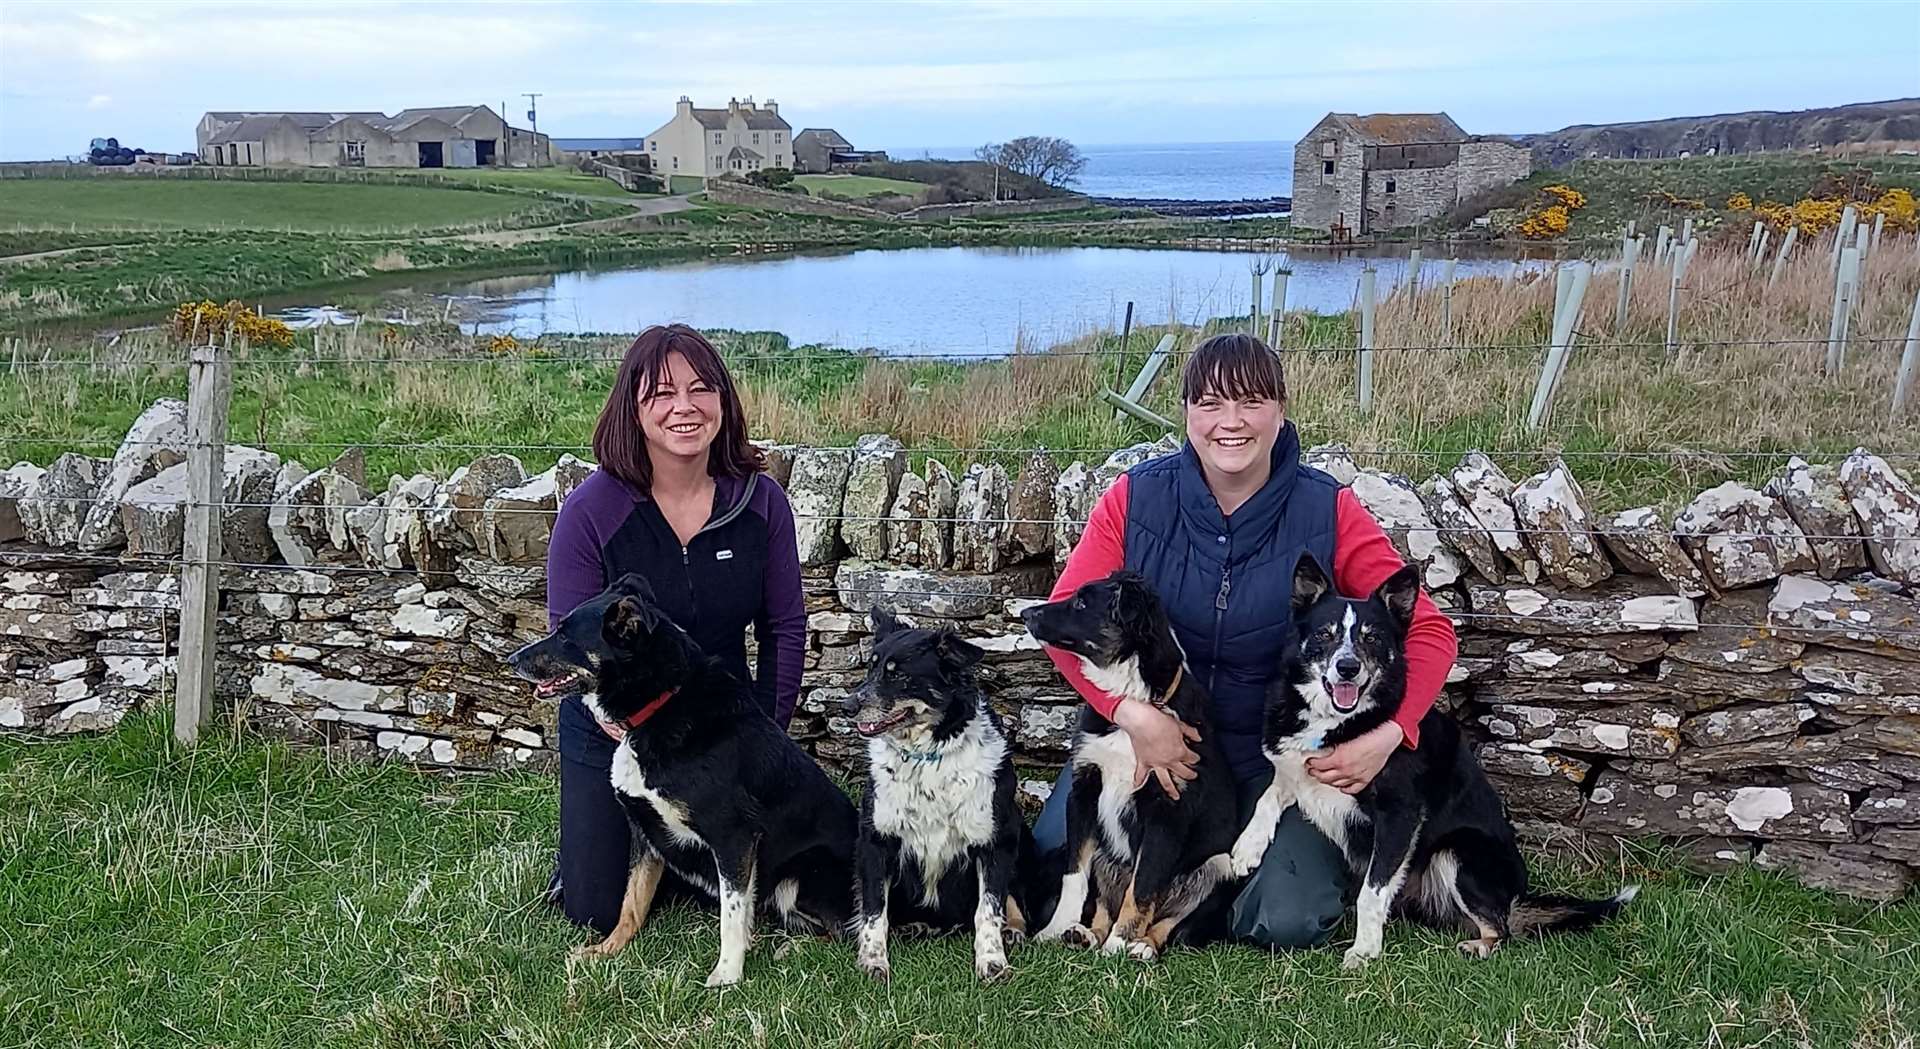 Sheepdog trials organisers Tina Coghill Robertson (left ) and Kirsteen Thorburn take a break, with Ham Farm in the background.